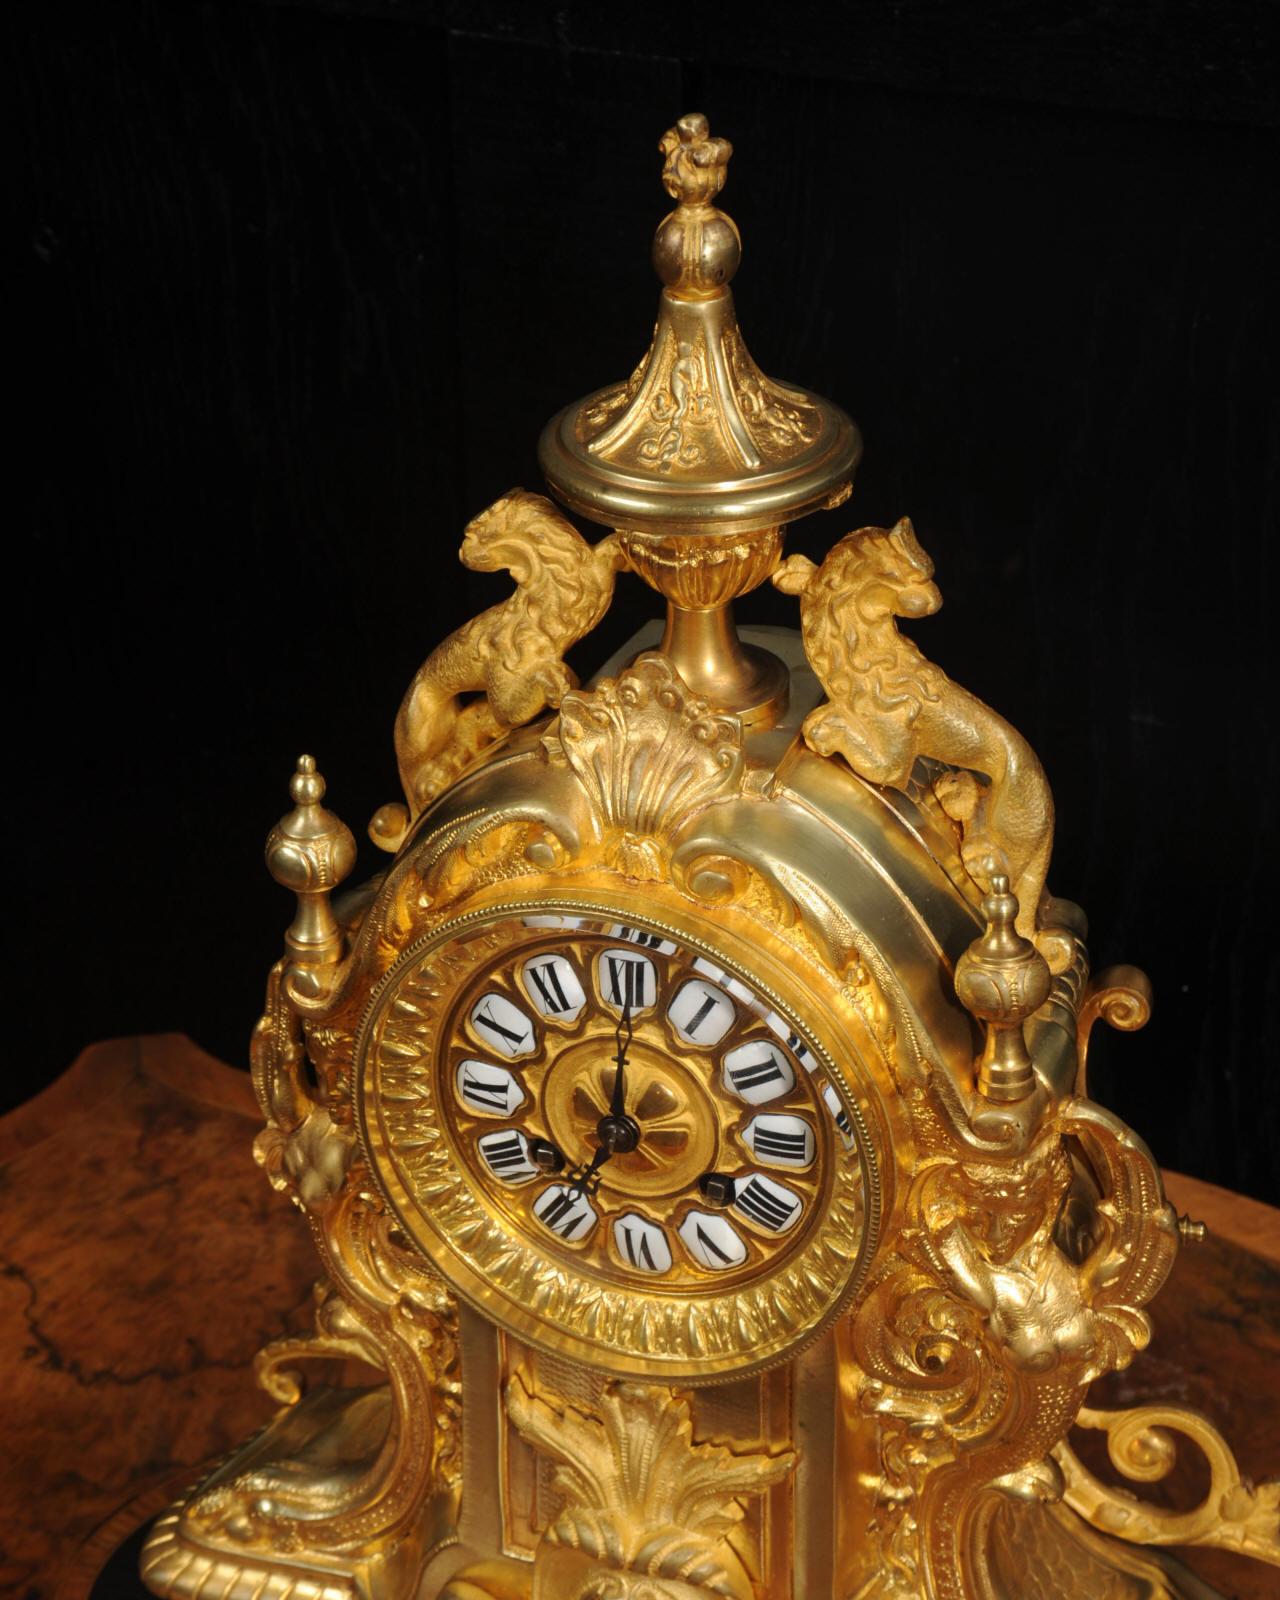 19th Century Antique French Ormolu Clock - Lions Rampant - overhauled and tested For Sale